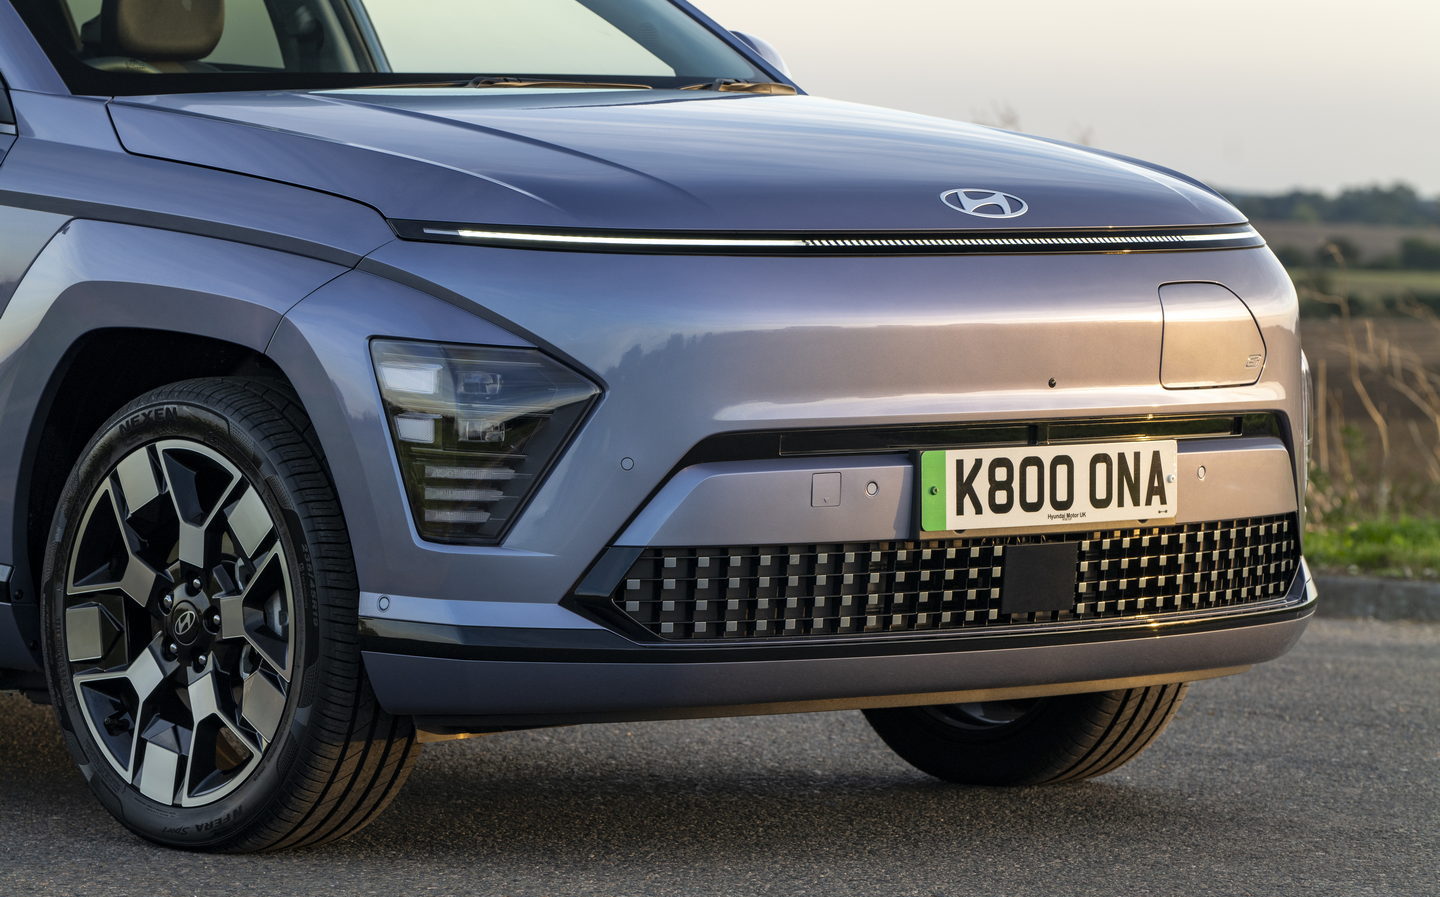 electric, first drive, hyundai, kona, suv (small / mid-size), hyundai kona review 2024: petrol, hybrid or electric, this compact crossover is a class act